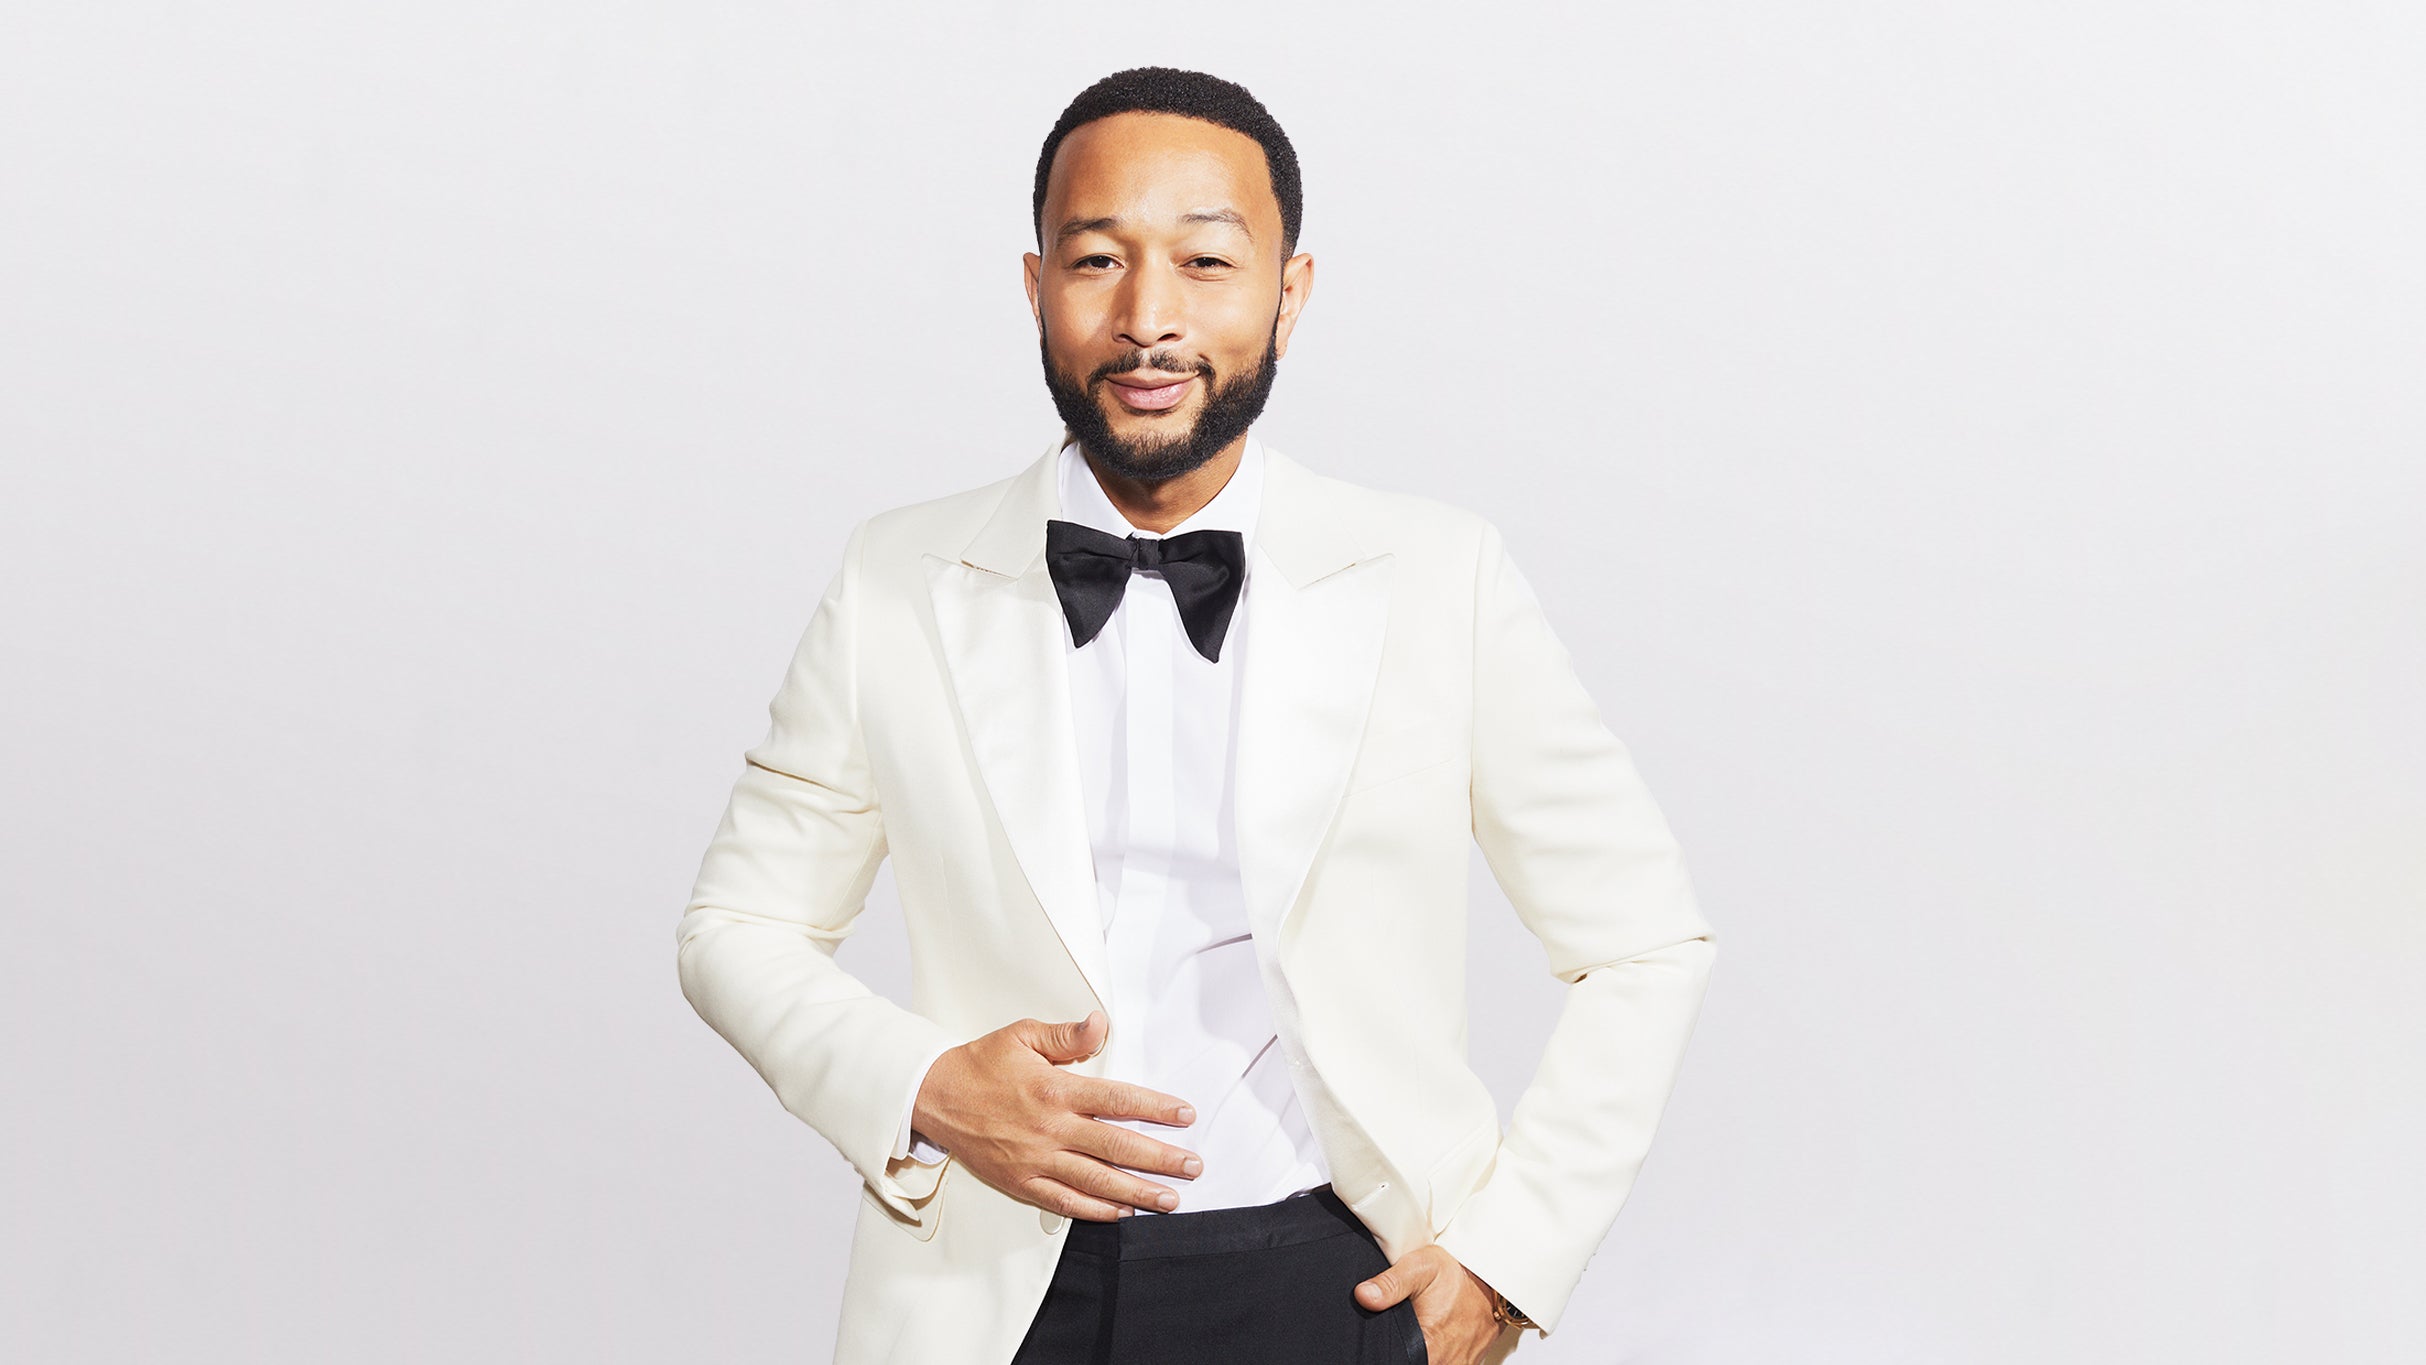 "An Evening With John Legend" in Atlantic City promo photo for Live Nation presale offer code